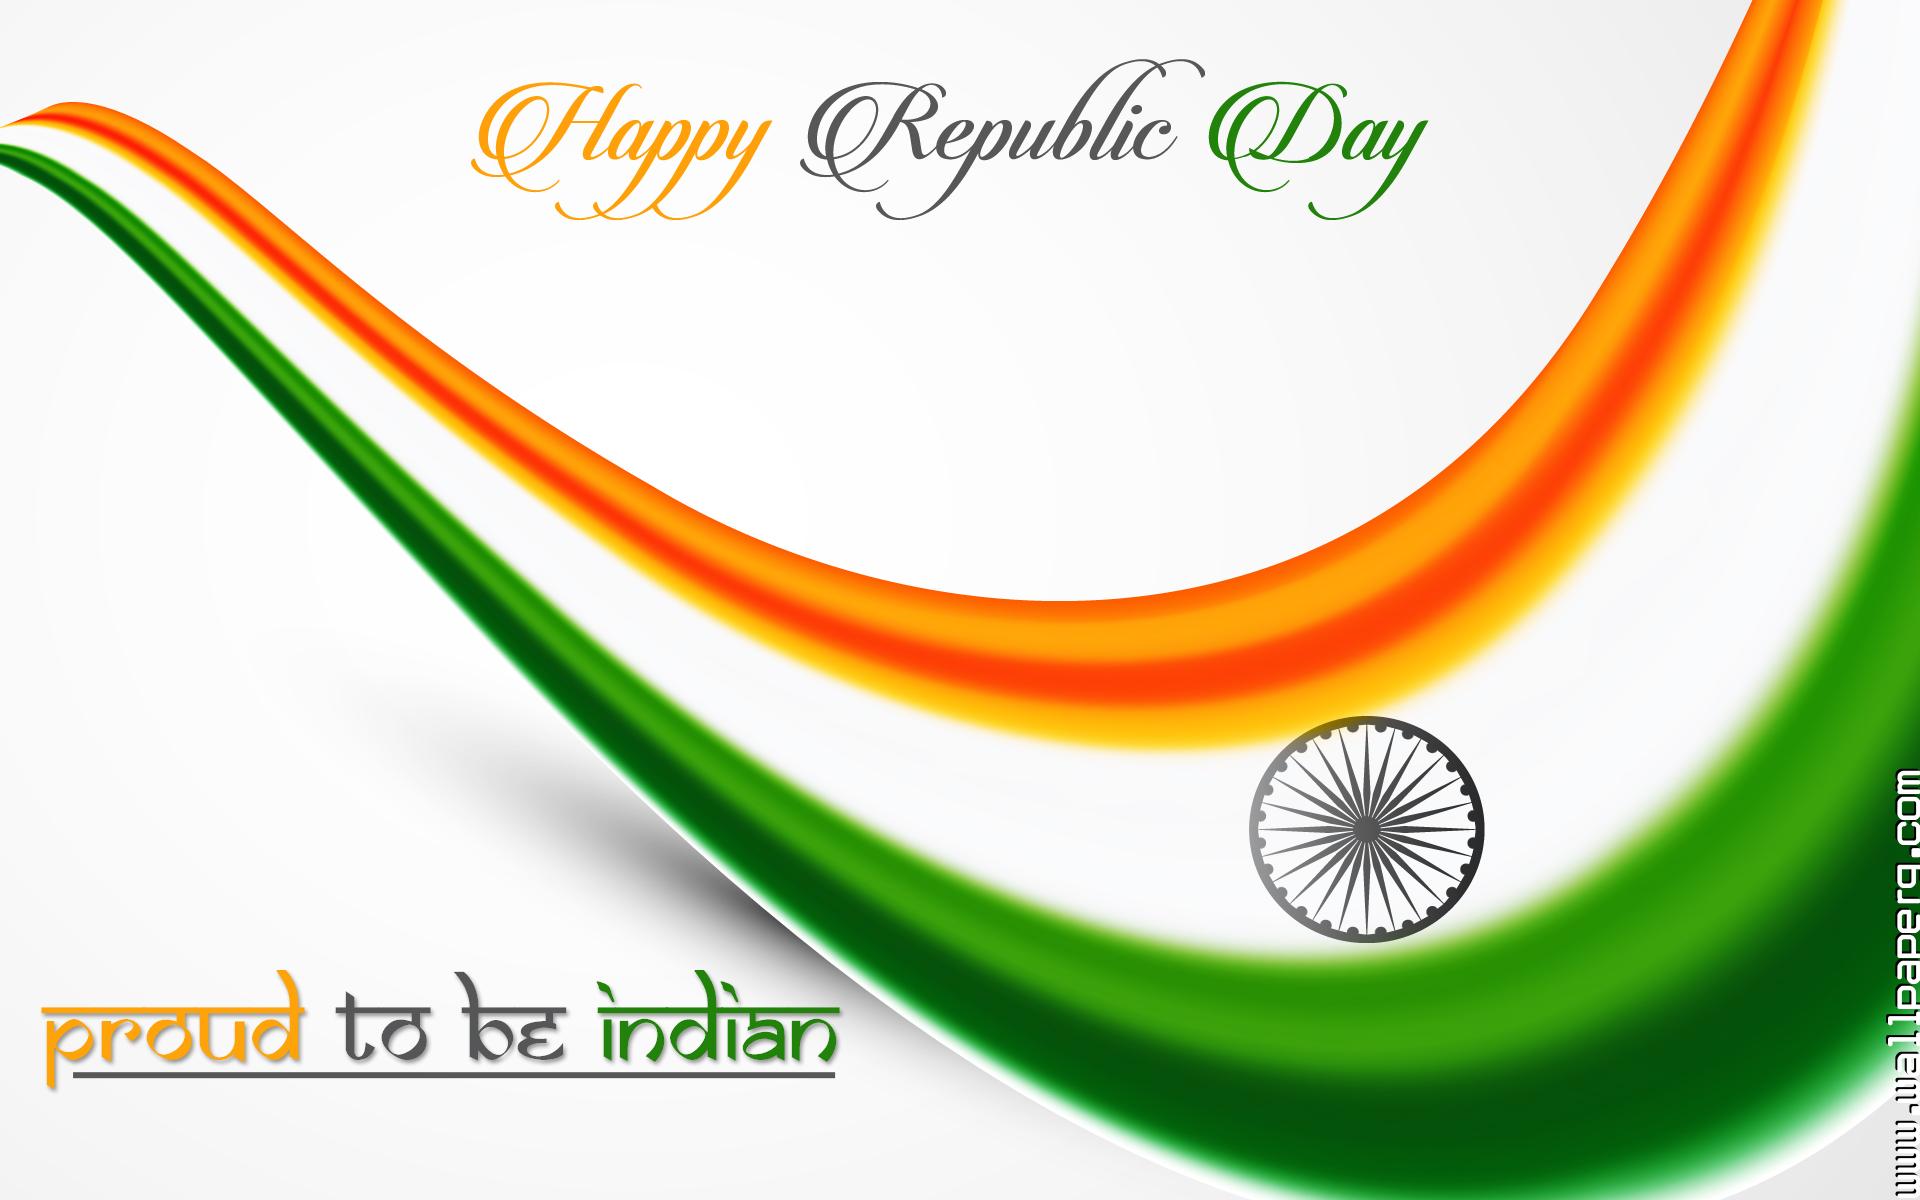 Proud To Be An Indian Republic Day - HD Wallpaper 